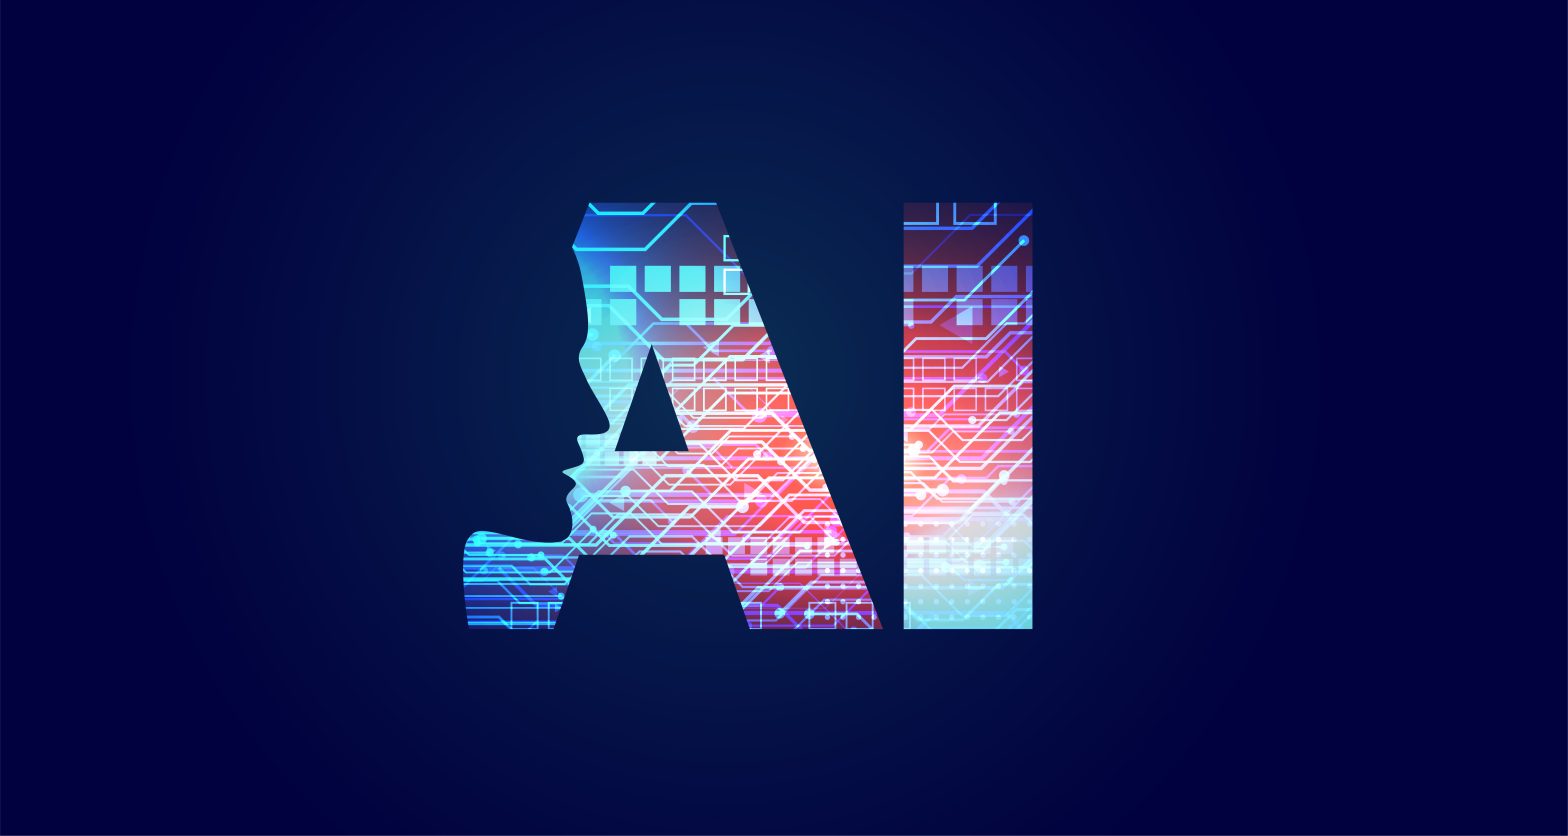 The power and connection of SQL AI tool with human